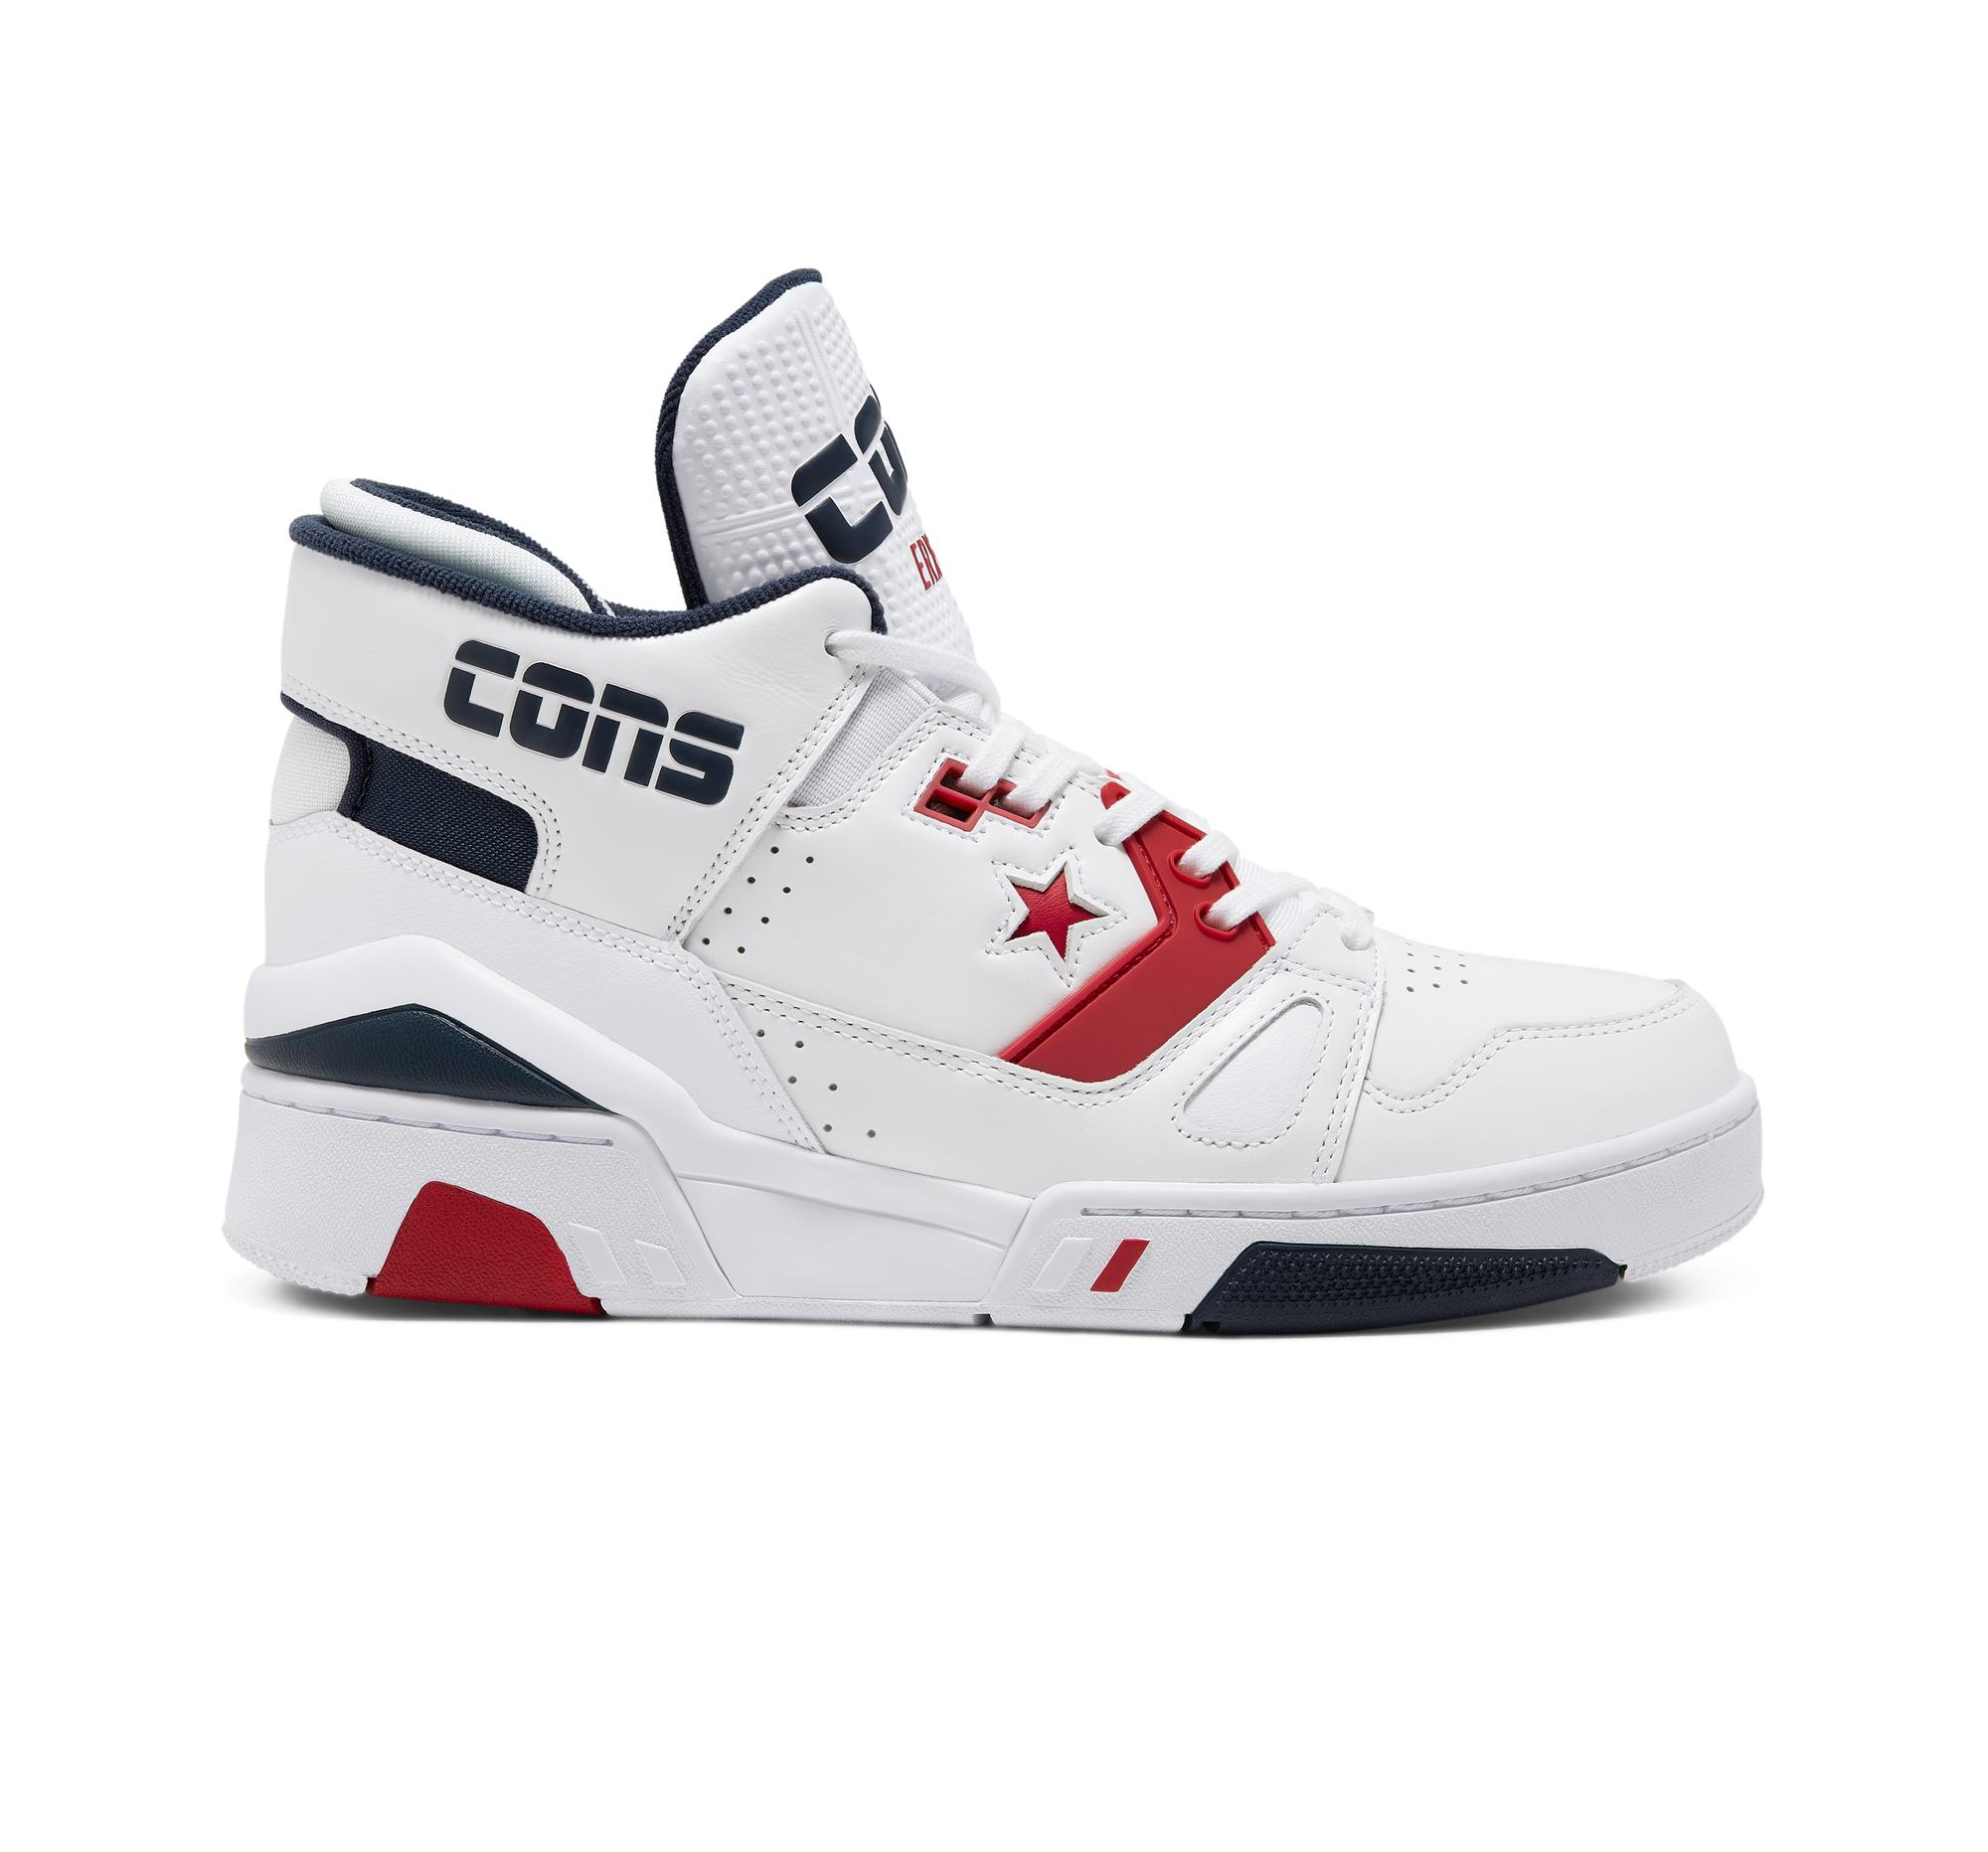 Converse Erx 260 Mid in White - Lyst